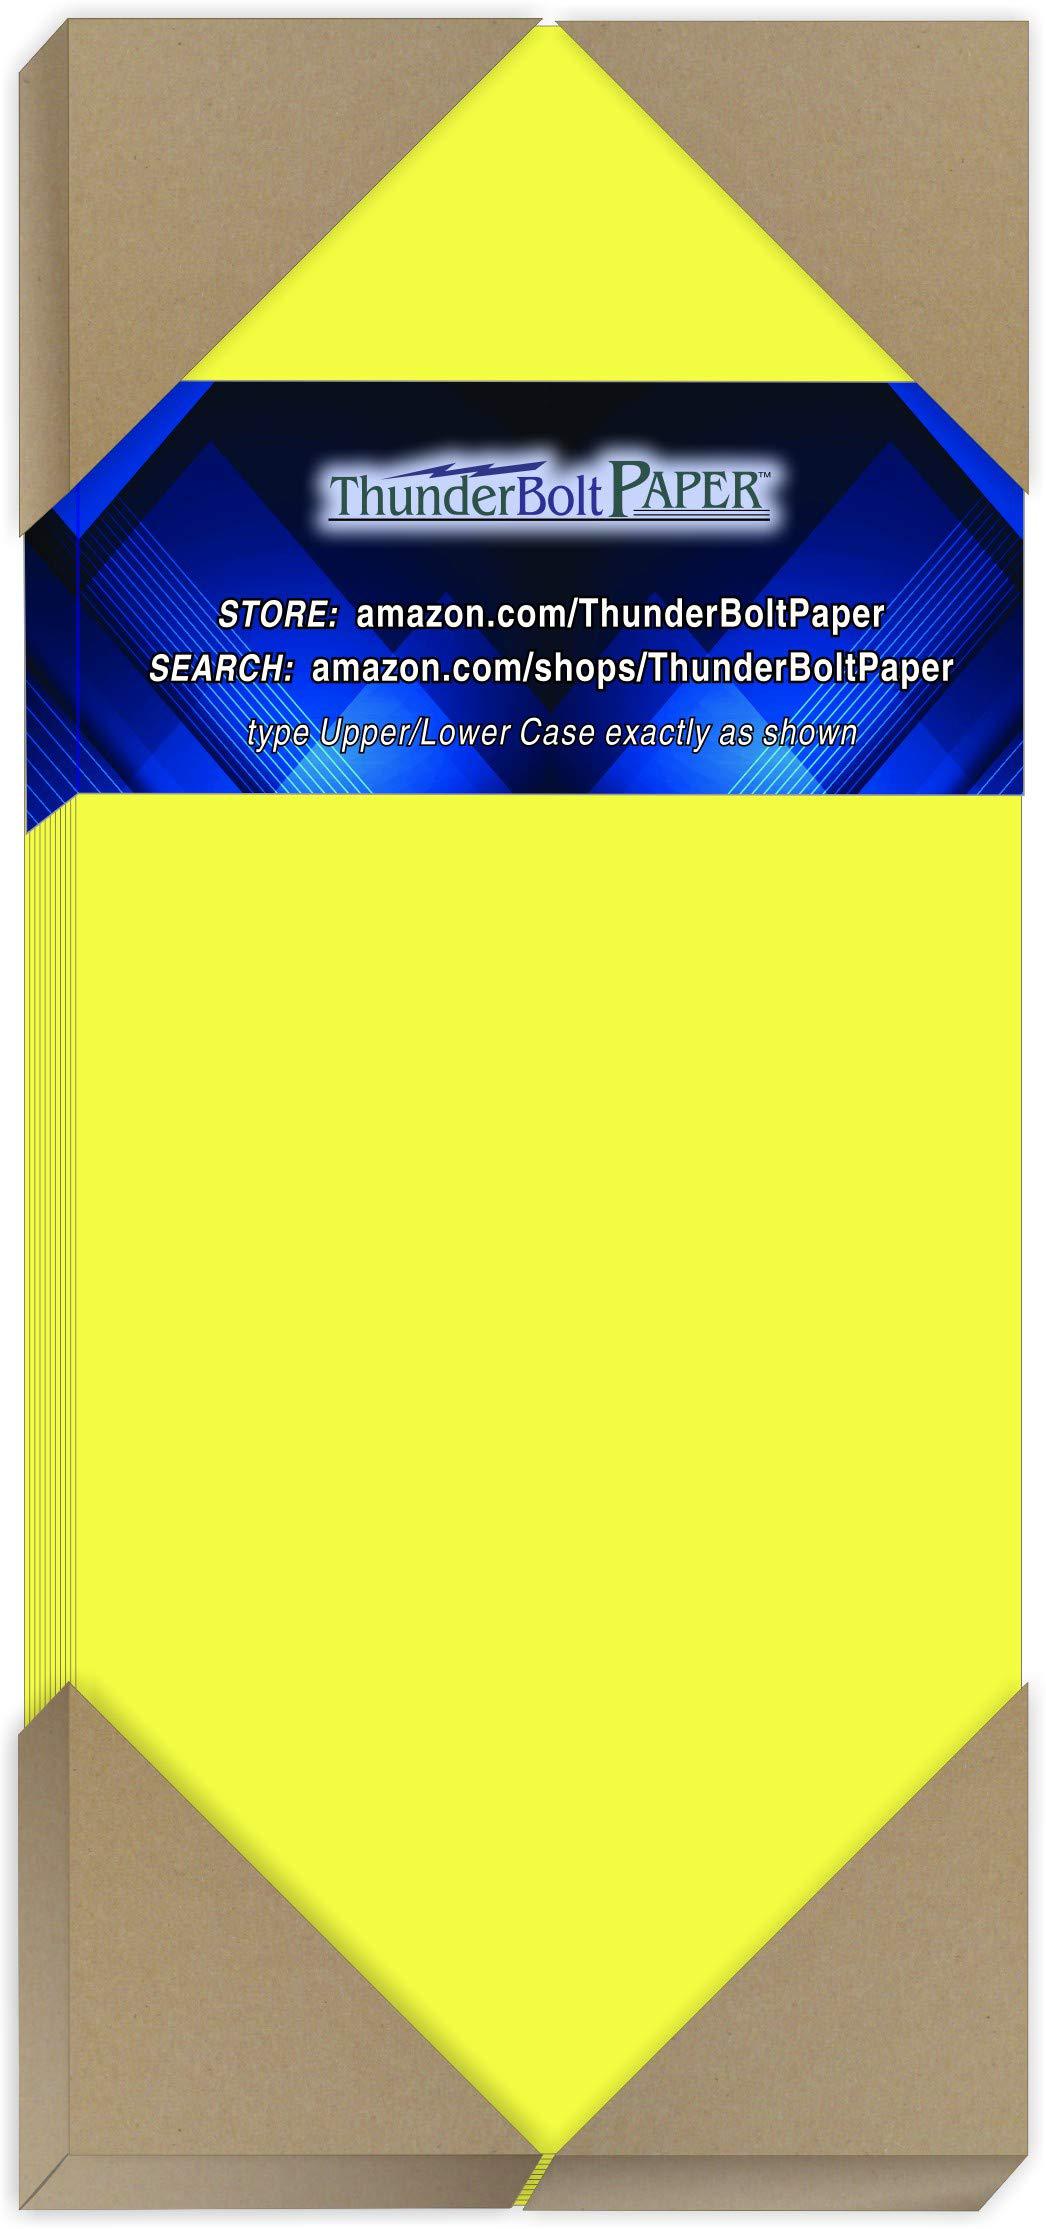 Thunderbolt Paper 150 Bright Neon Yellow Fluorescent Color Cardstock - 4 x 9 (4x9 Inches) #10 Envelope Insert Size - 65#lb/pound Light Card